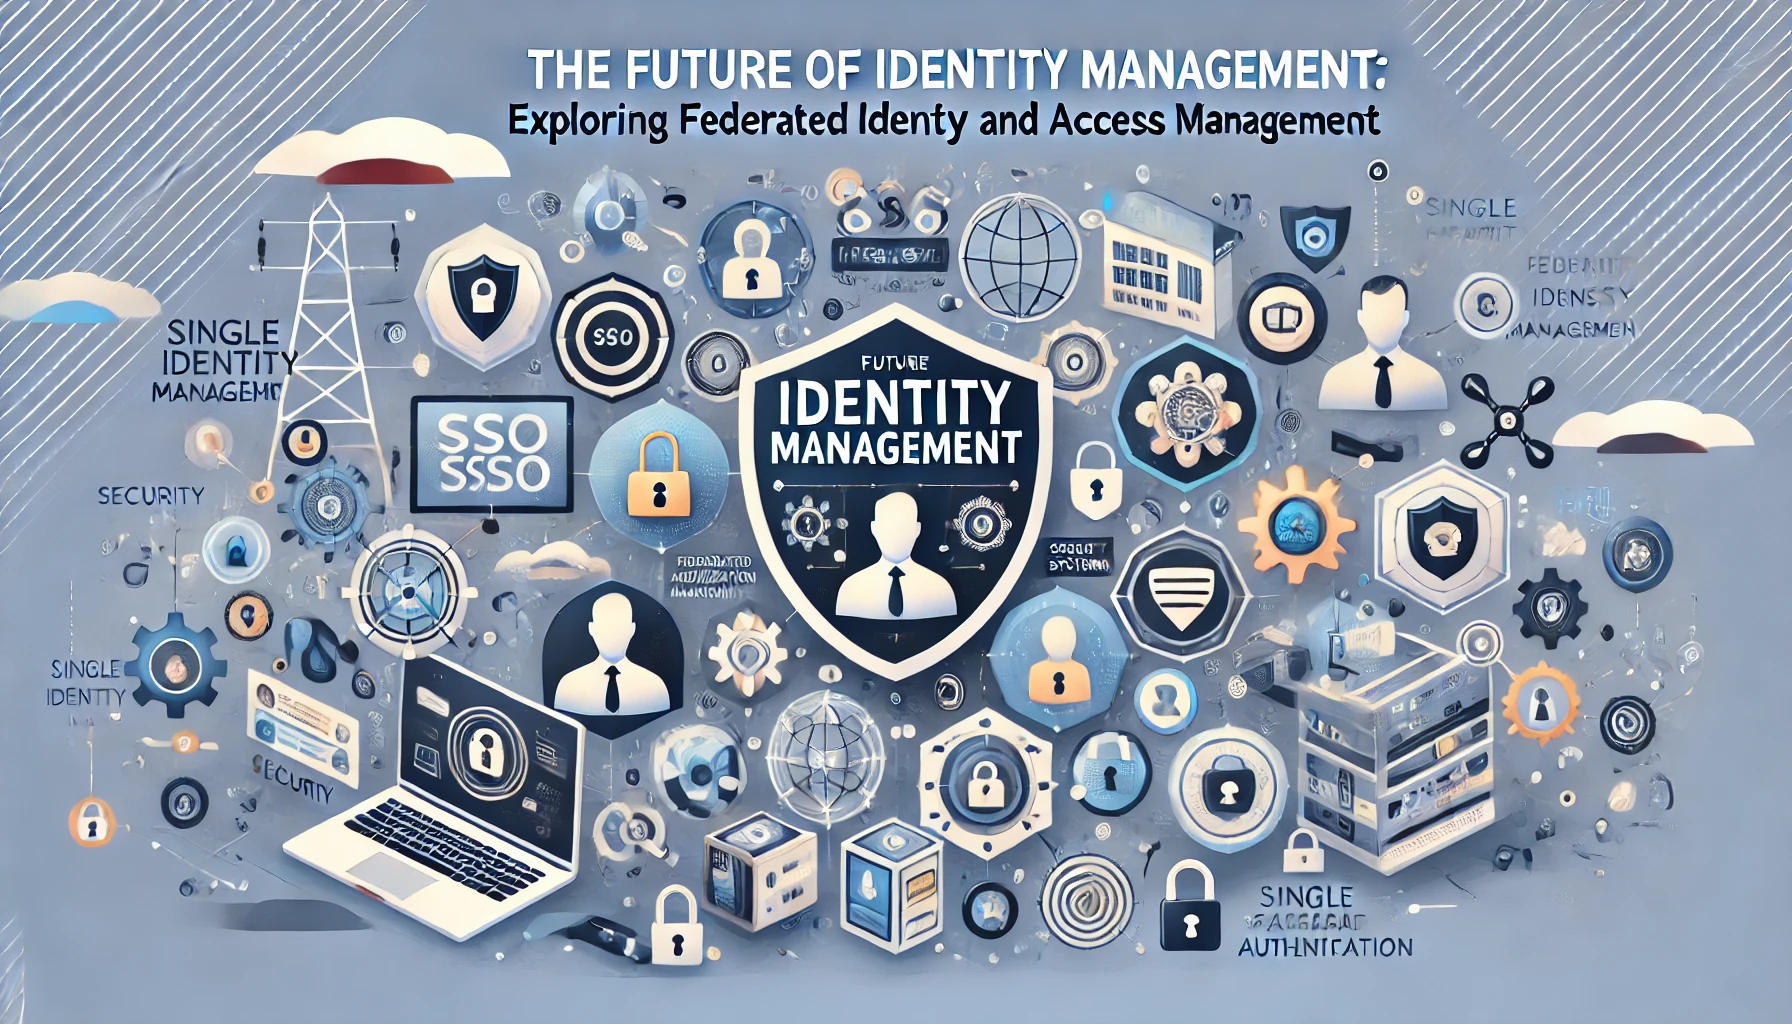 The Future of Identity Management: Exploring Federated Identity and Access Management